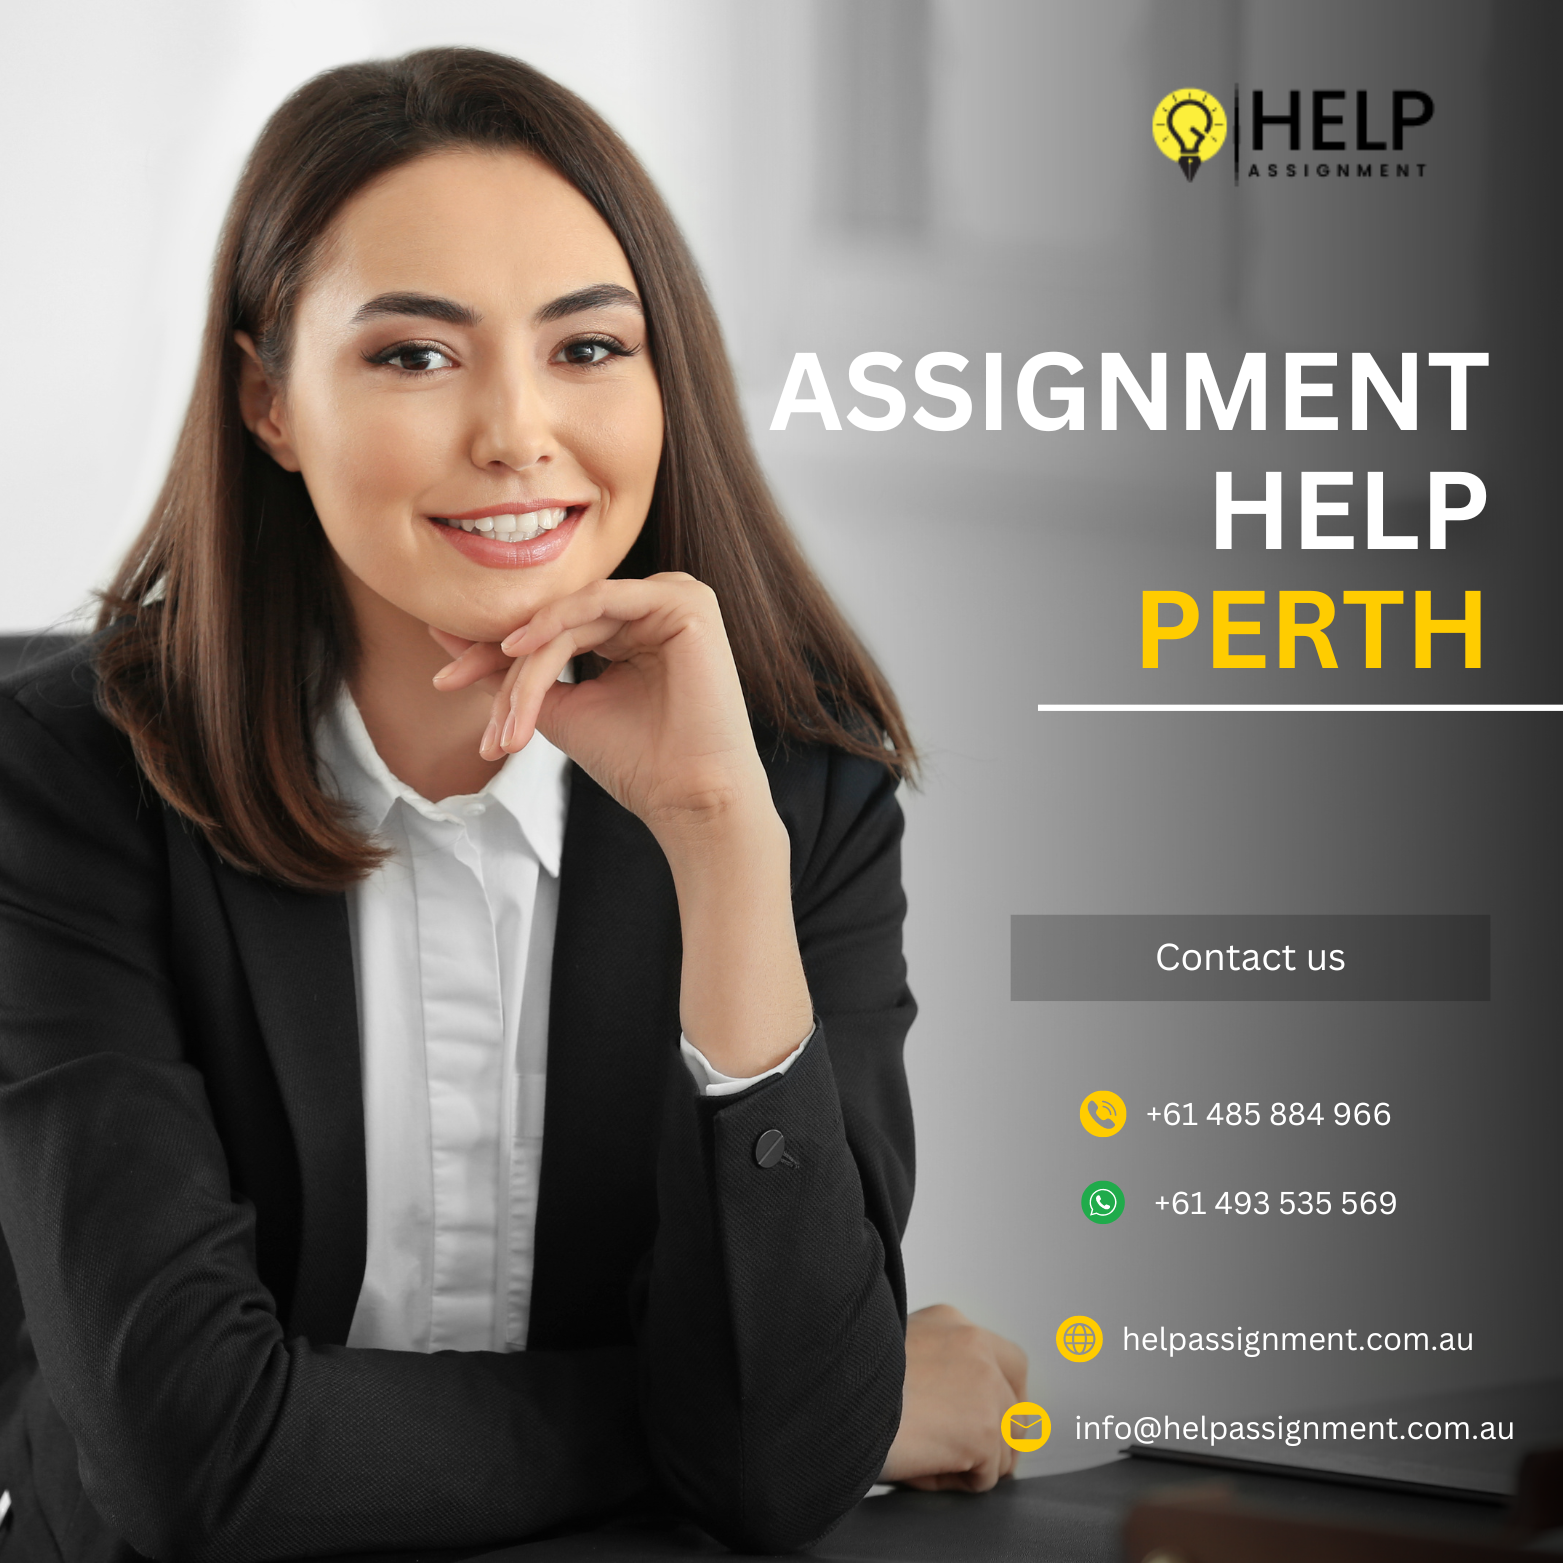 Assignment Help Perth Podcast: The Academic Advantage!